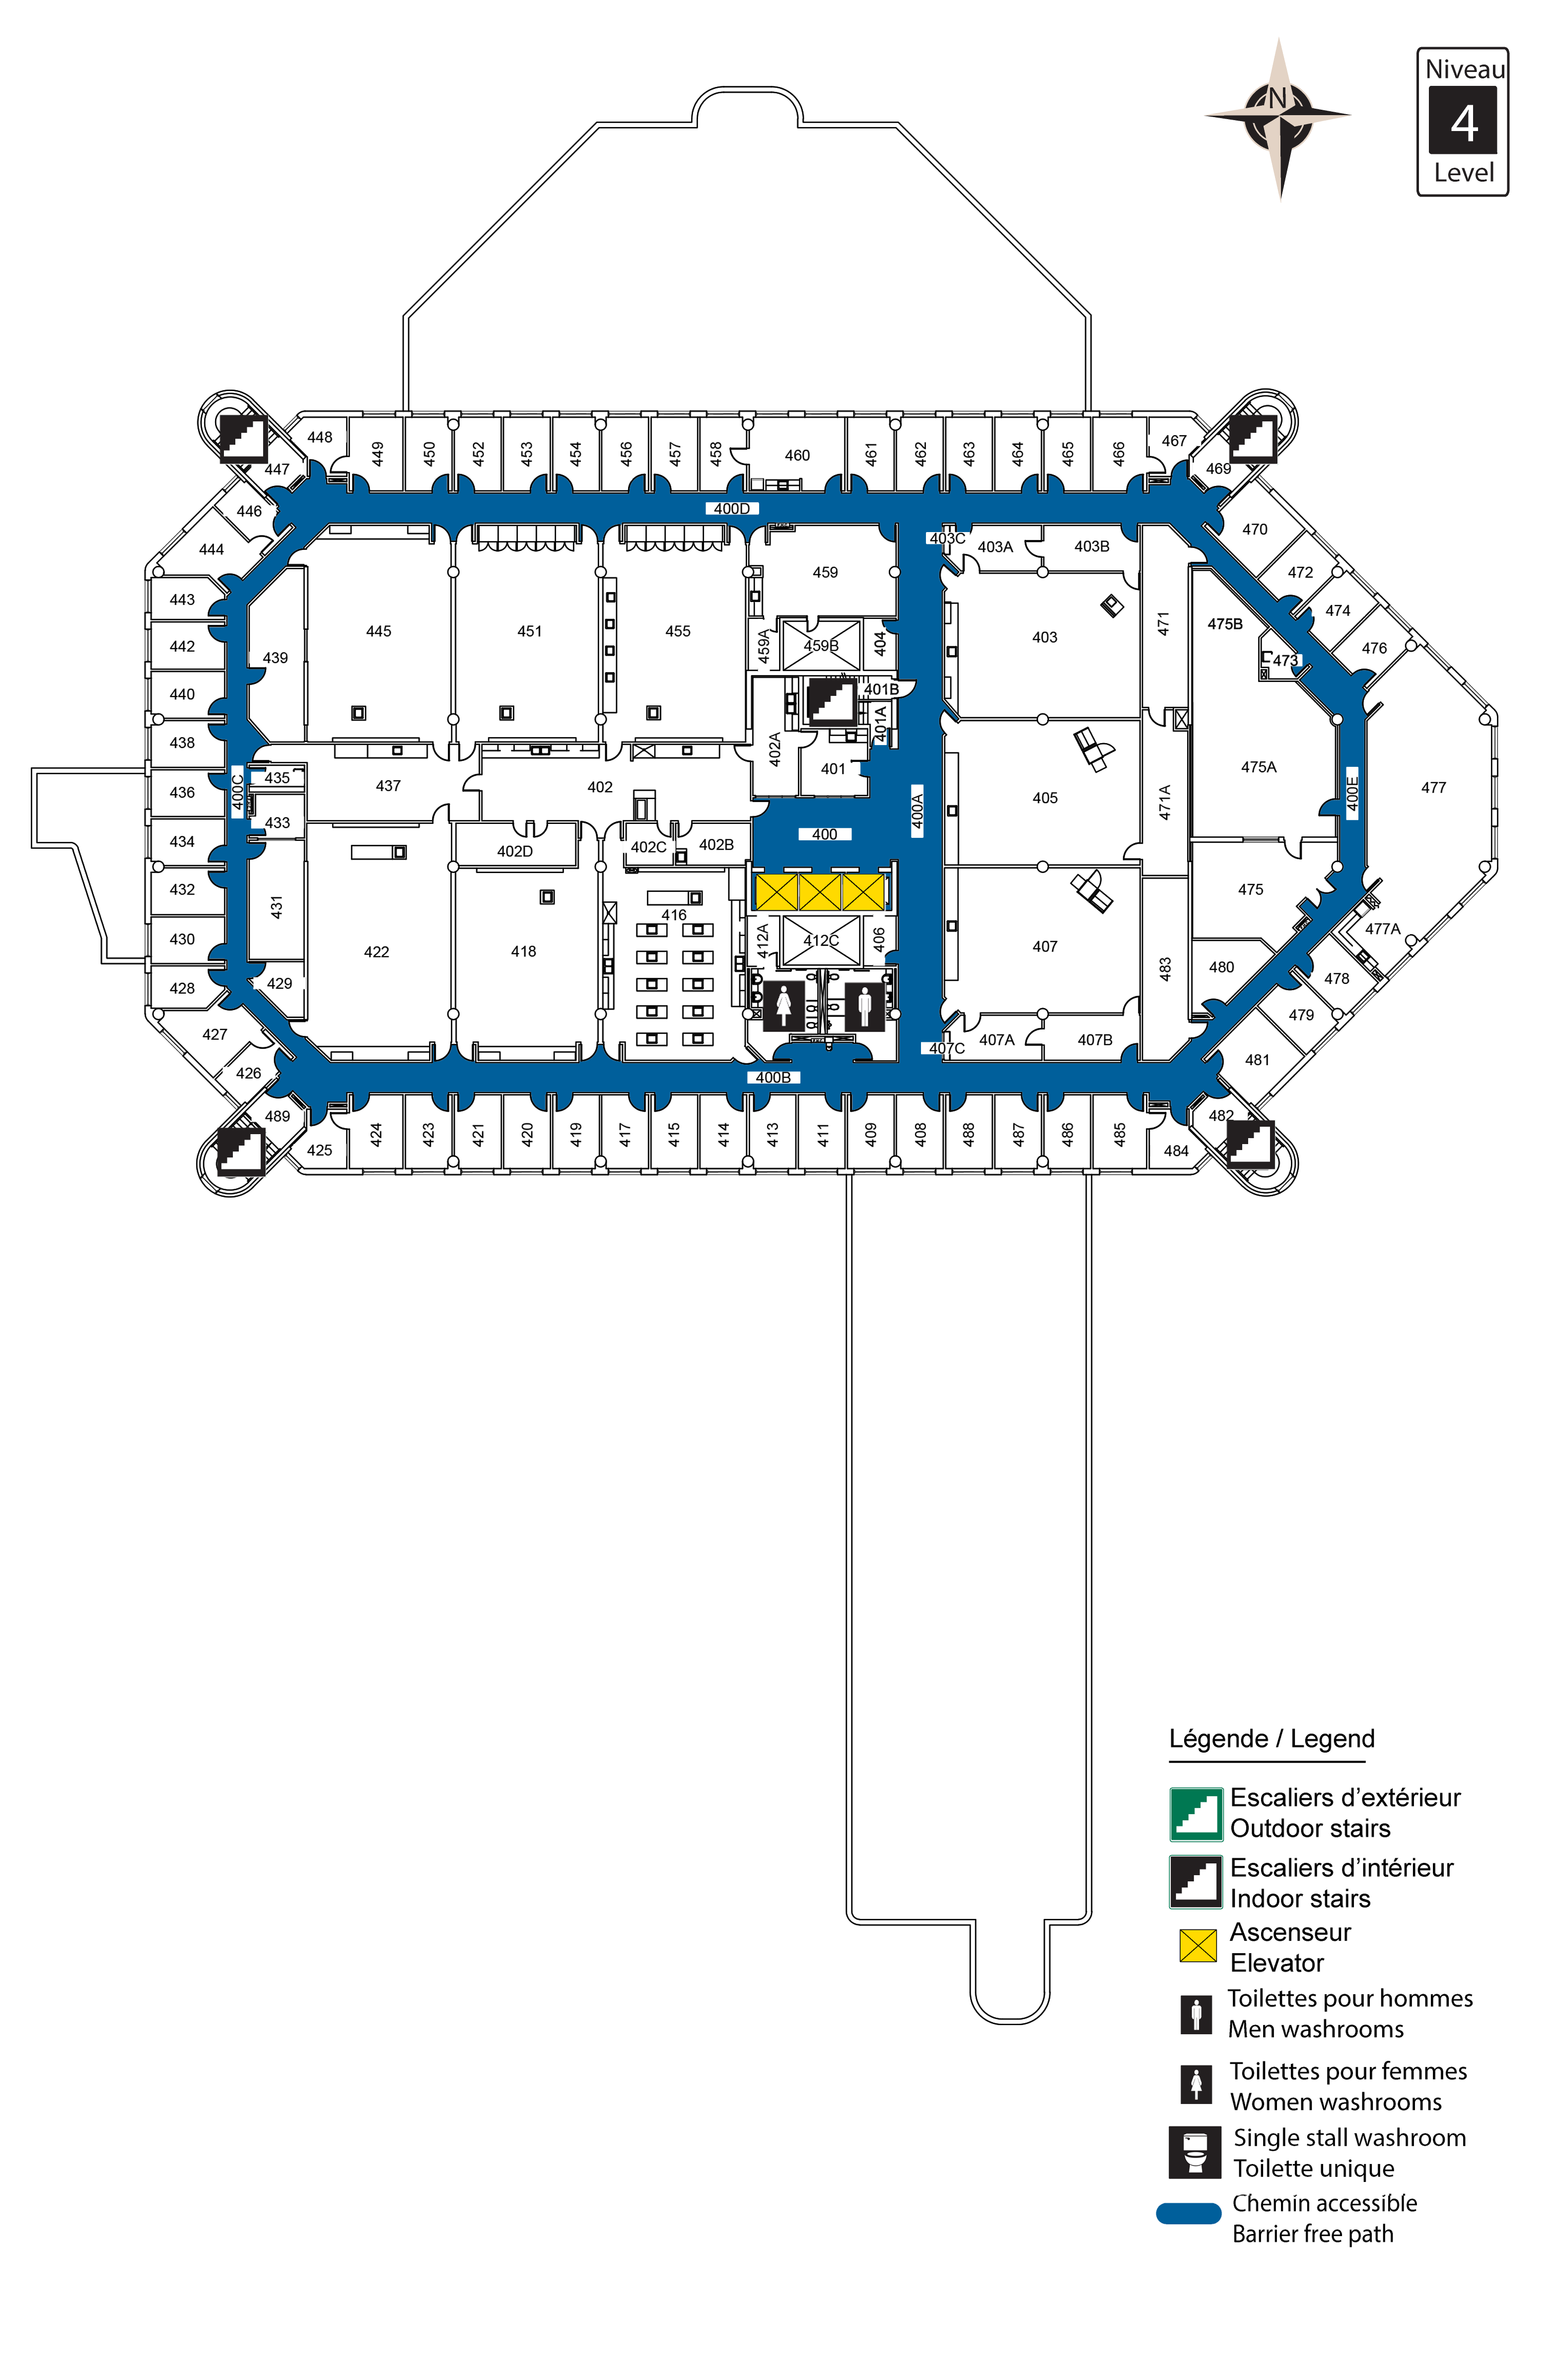 Accessible map of LMX level 4